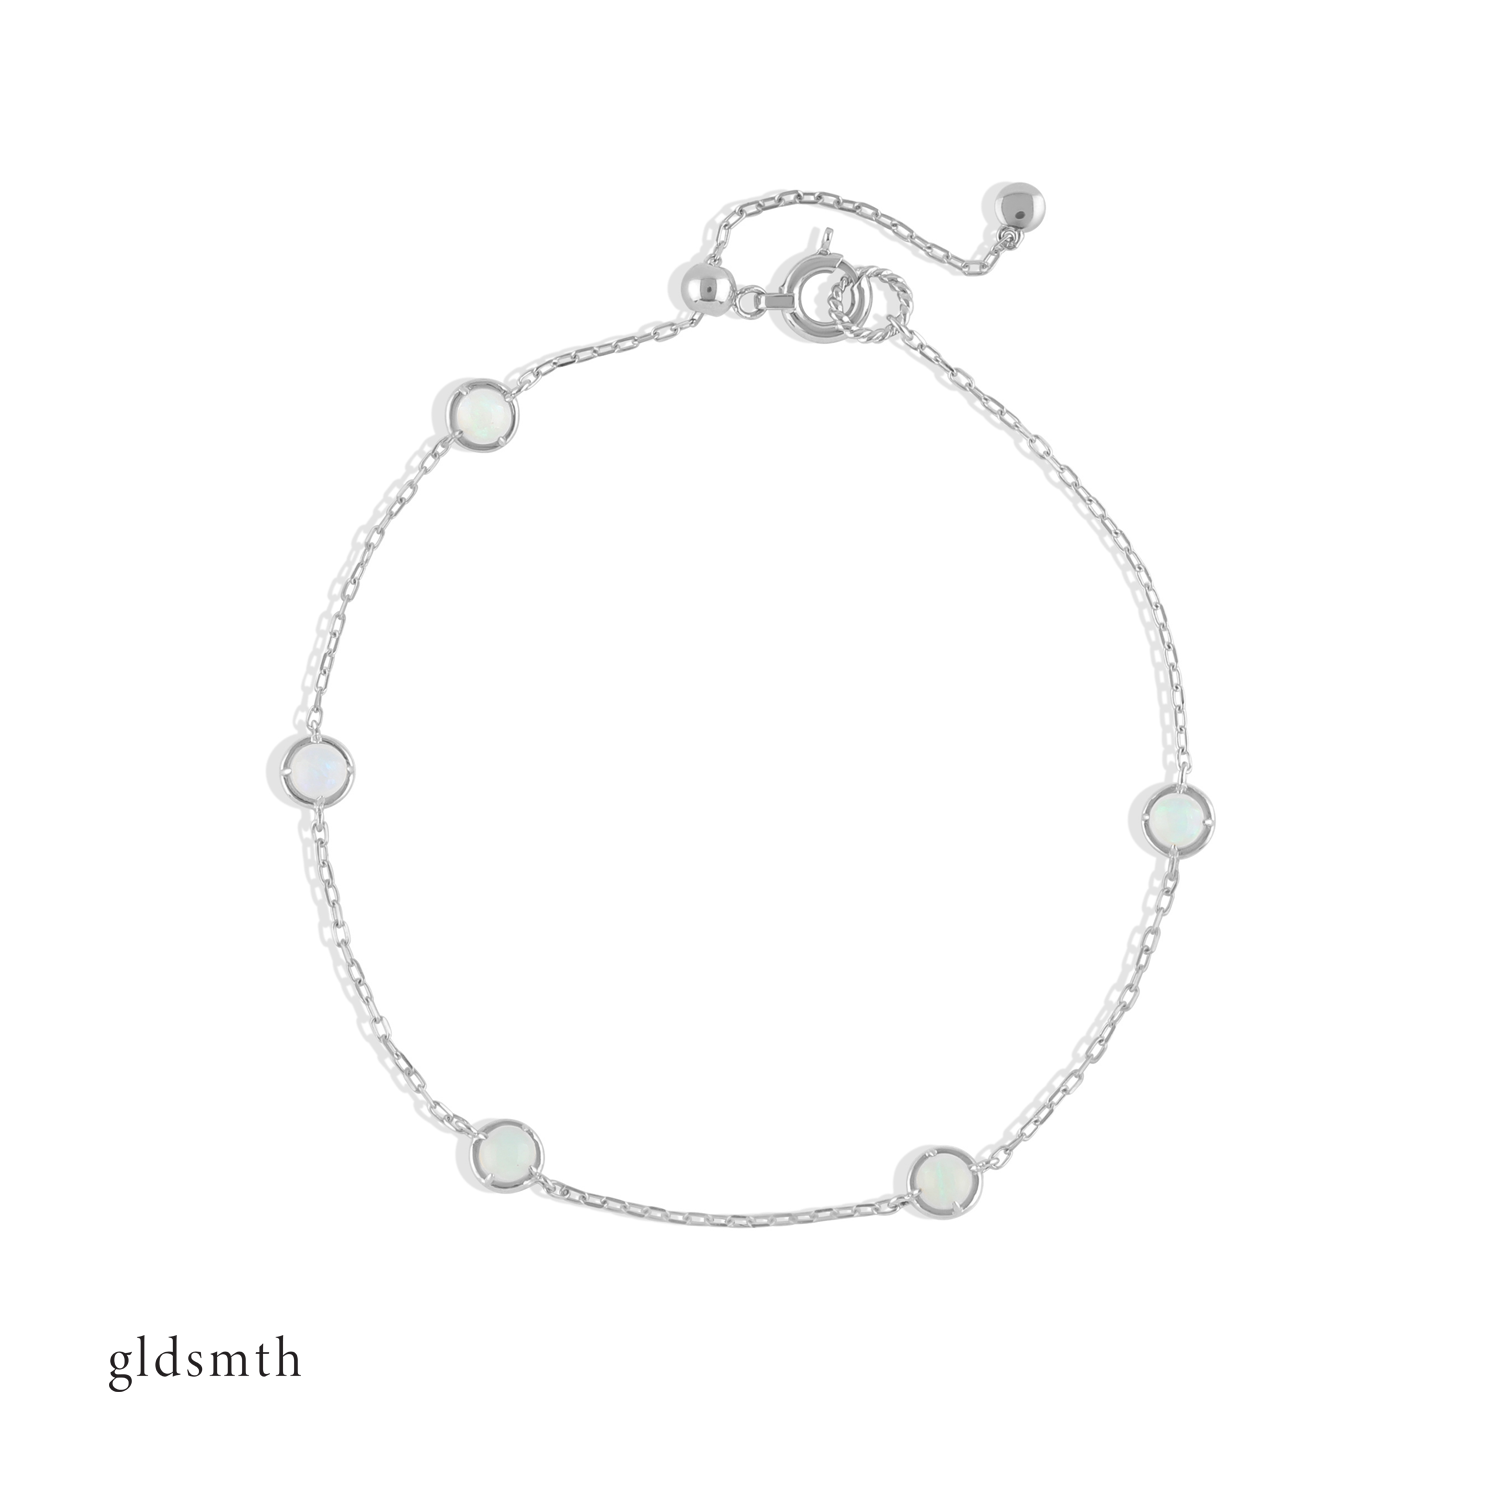 Elegant and fine handcrafted 10k solid white gold bracelet with opals.